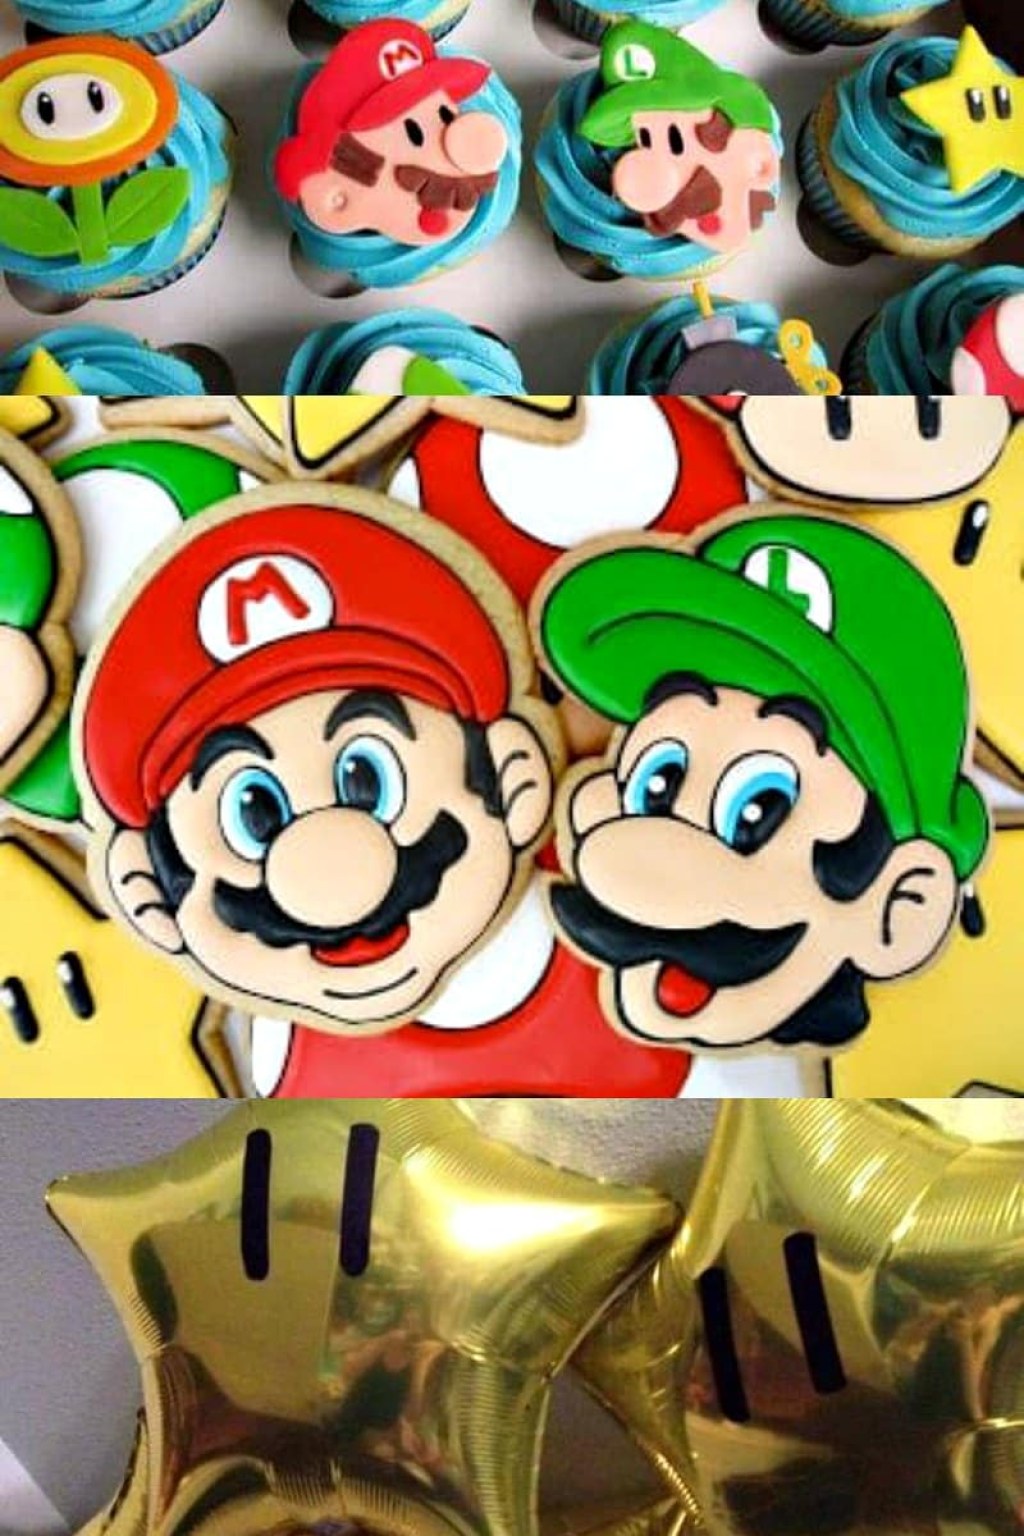 creative mario decoration - Super Mario Brothers Party Ideas & Supplies - Spaceships and